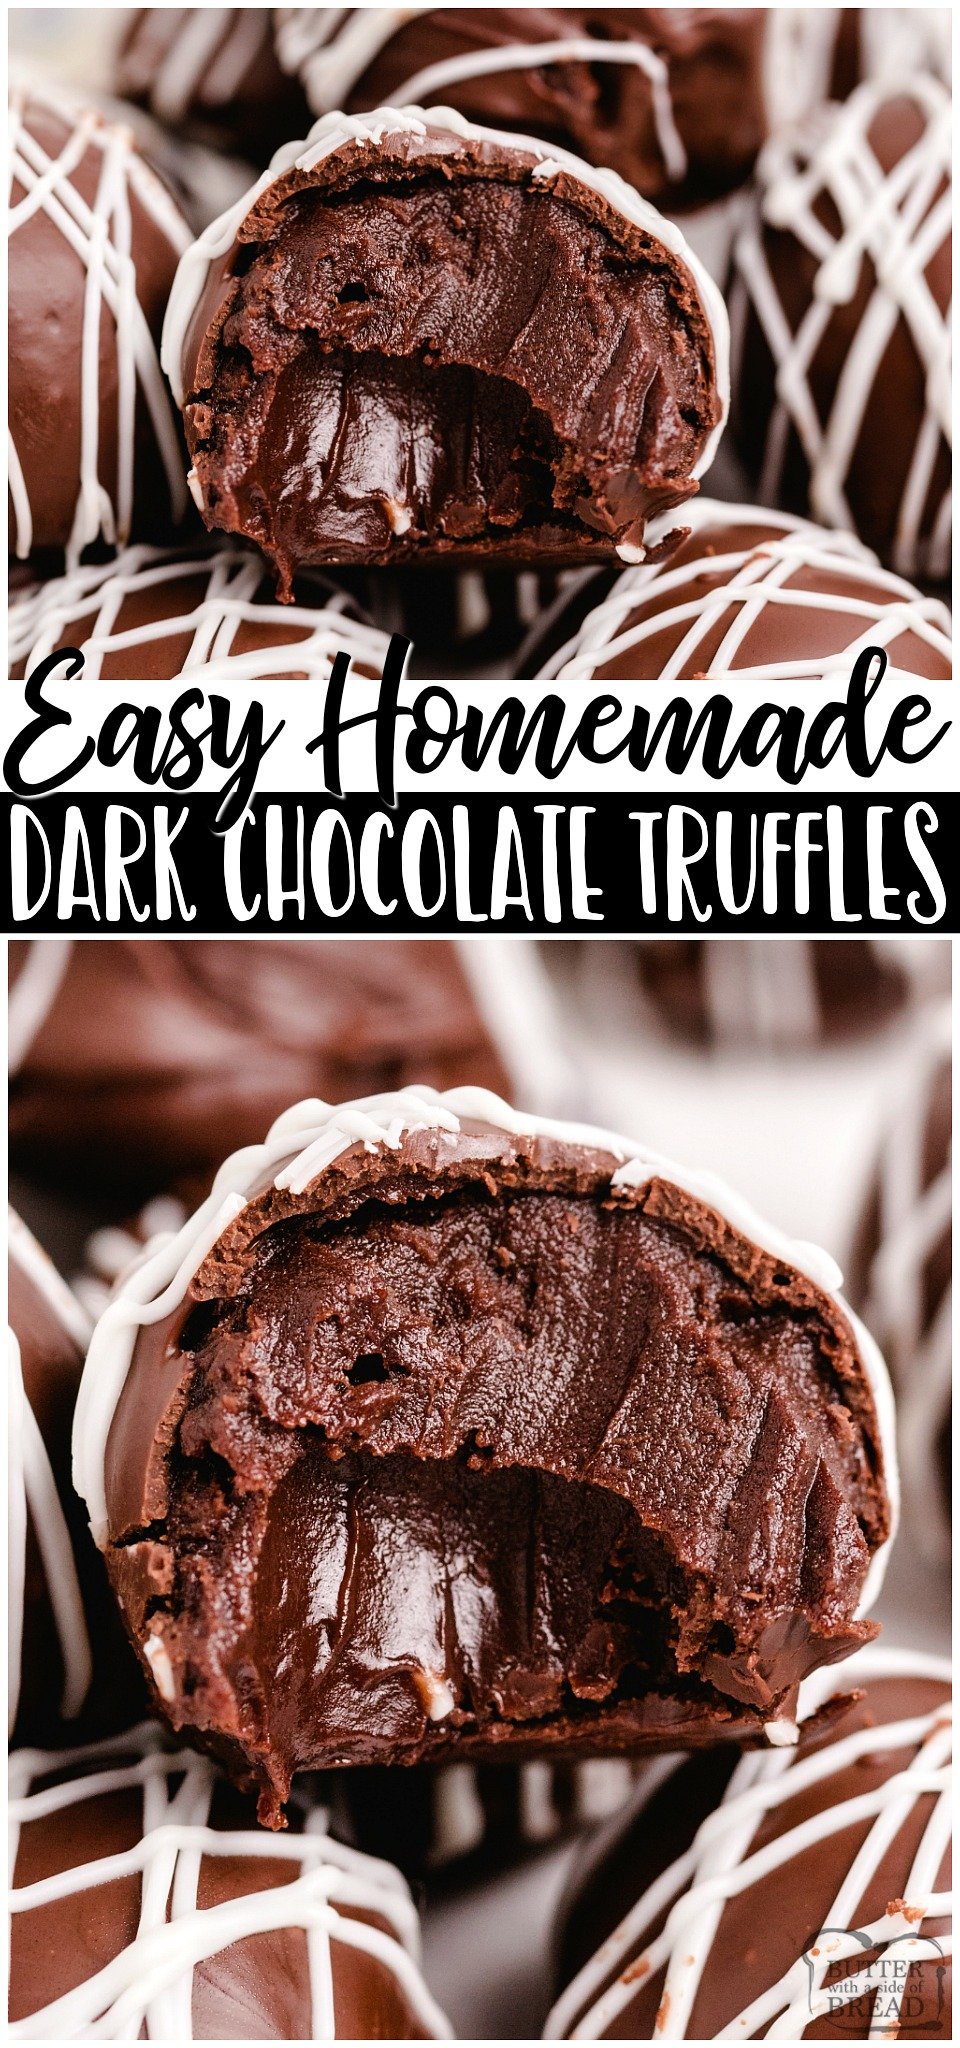 Homemade Dark chocolate Truffles made with just 5 ingredients and SO amazing! Chocolate chips, heavy cream and butter combine for a rich & smooth luscious chocolate truffle filling you make easily at home!